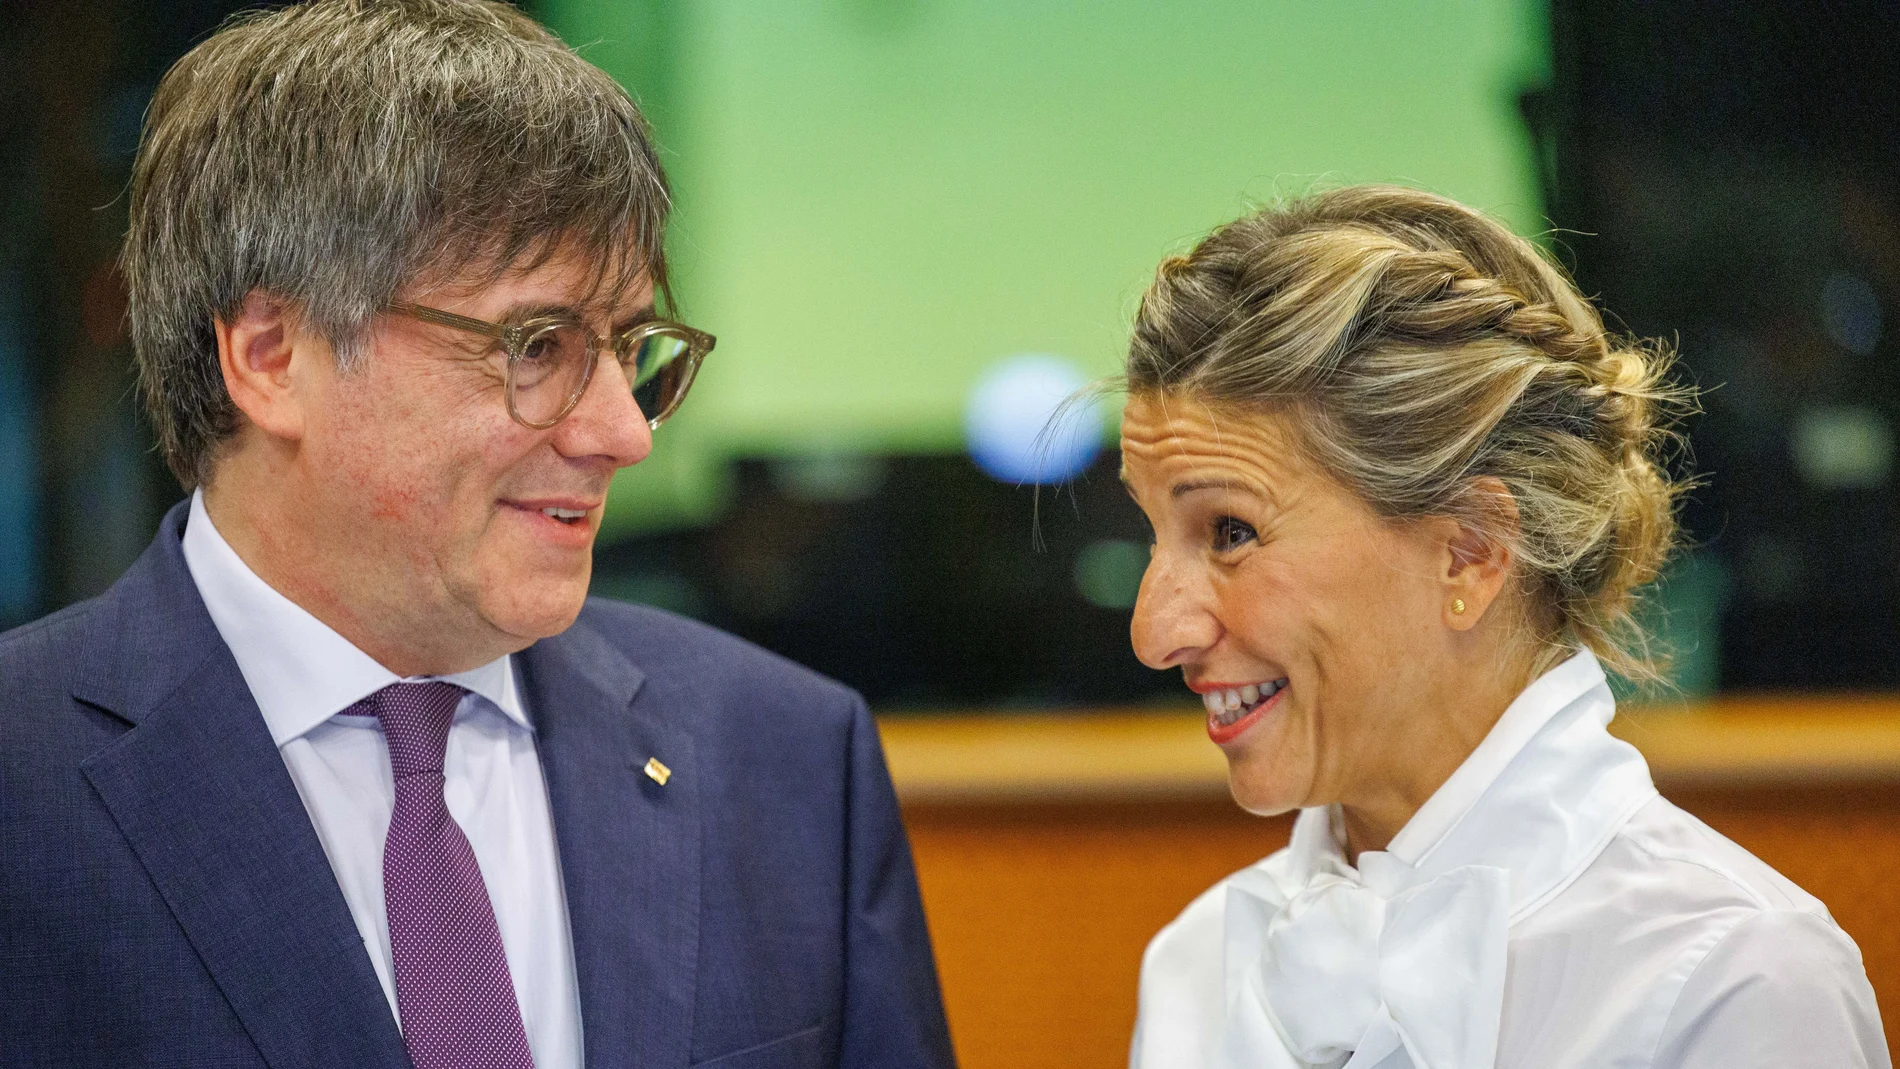 Member of the European Parliament Carles Puigdemont (L) and Spanish Second Deputy Prime Minister and Sumar party leader Yolanda Diaz speak in Brussels.